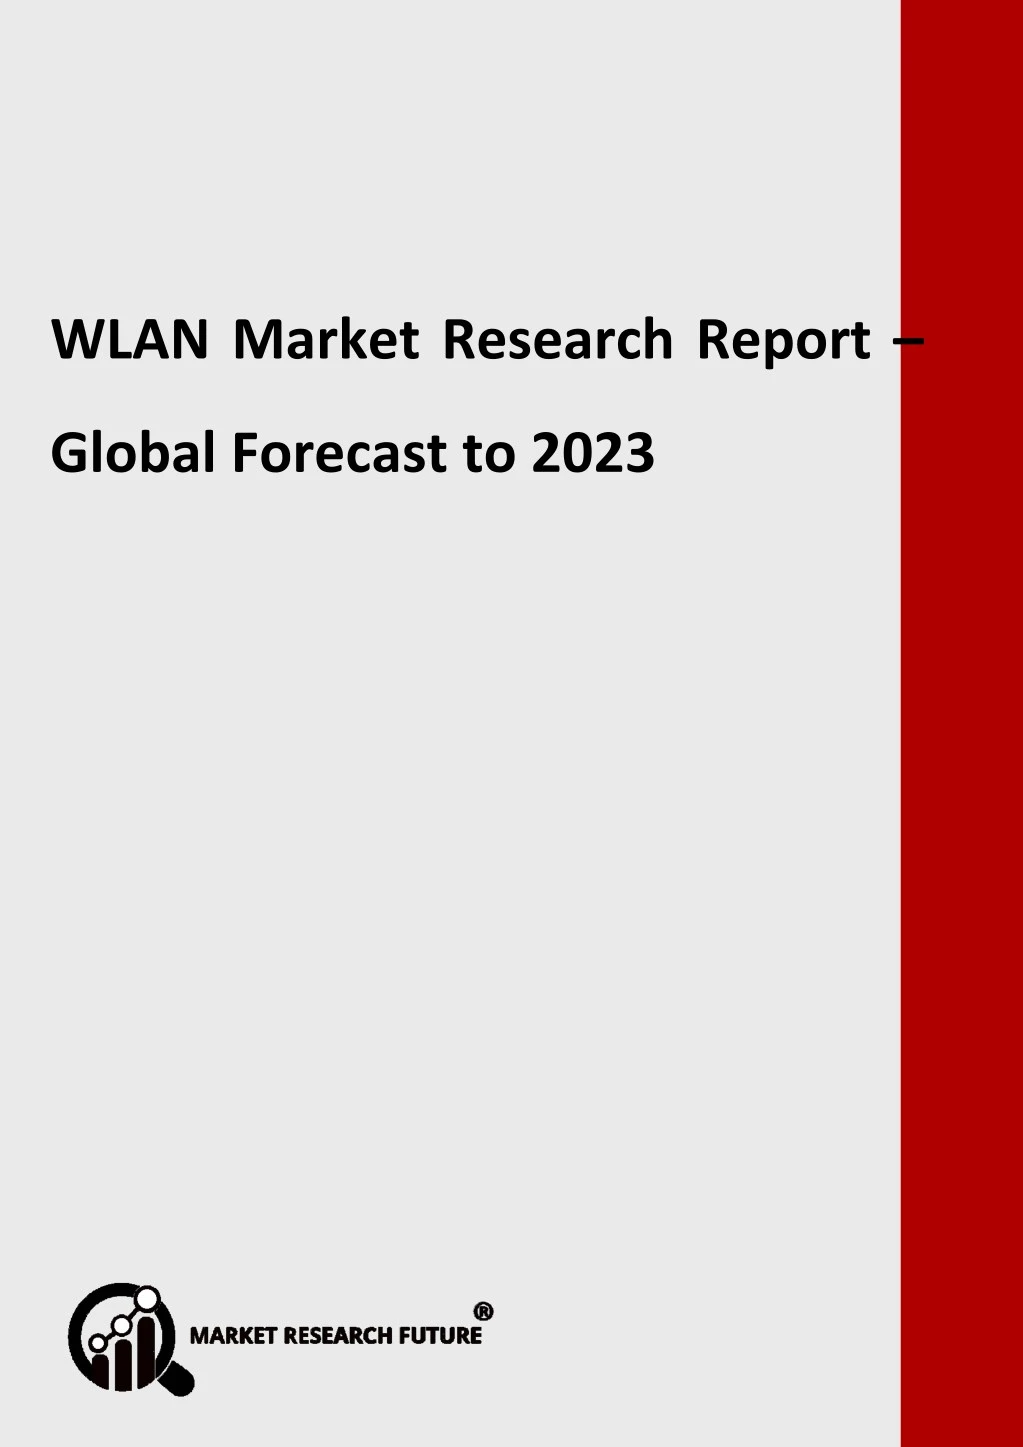 wlan market research report global forecast